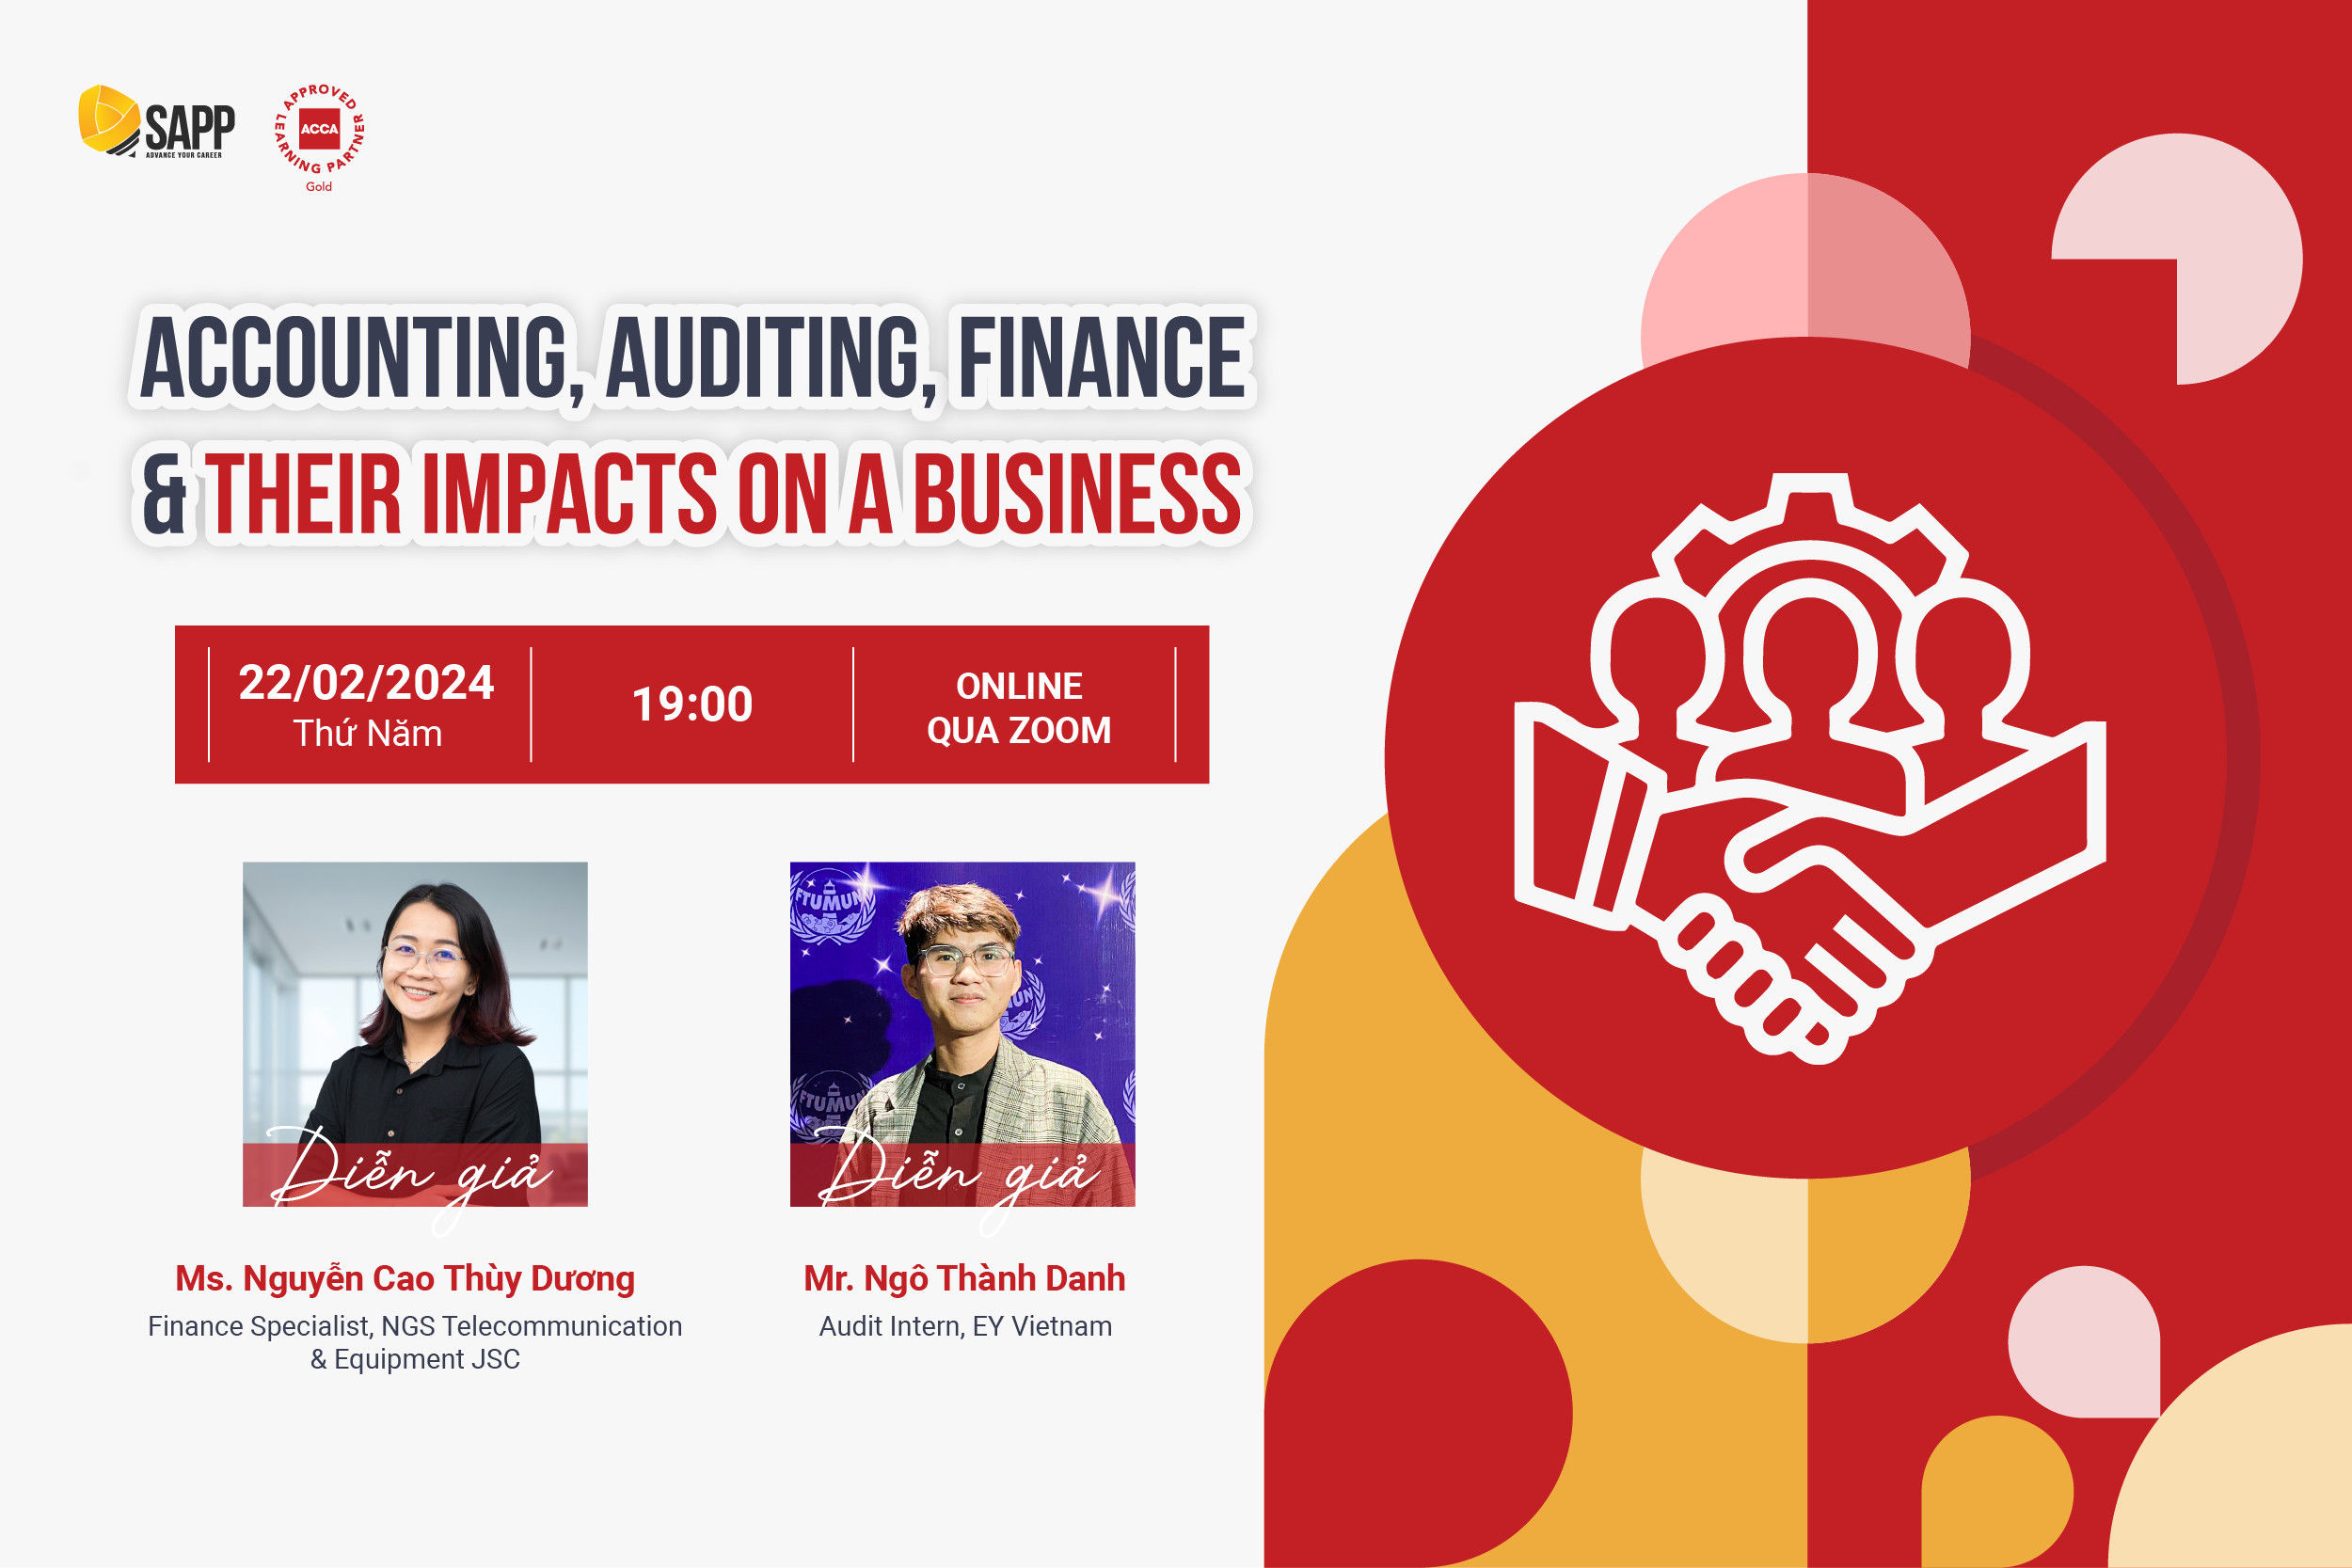 Webinar "Accounting, Auditing, Finance & Their Impacts On A Business"